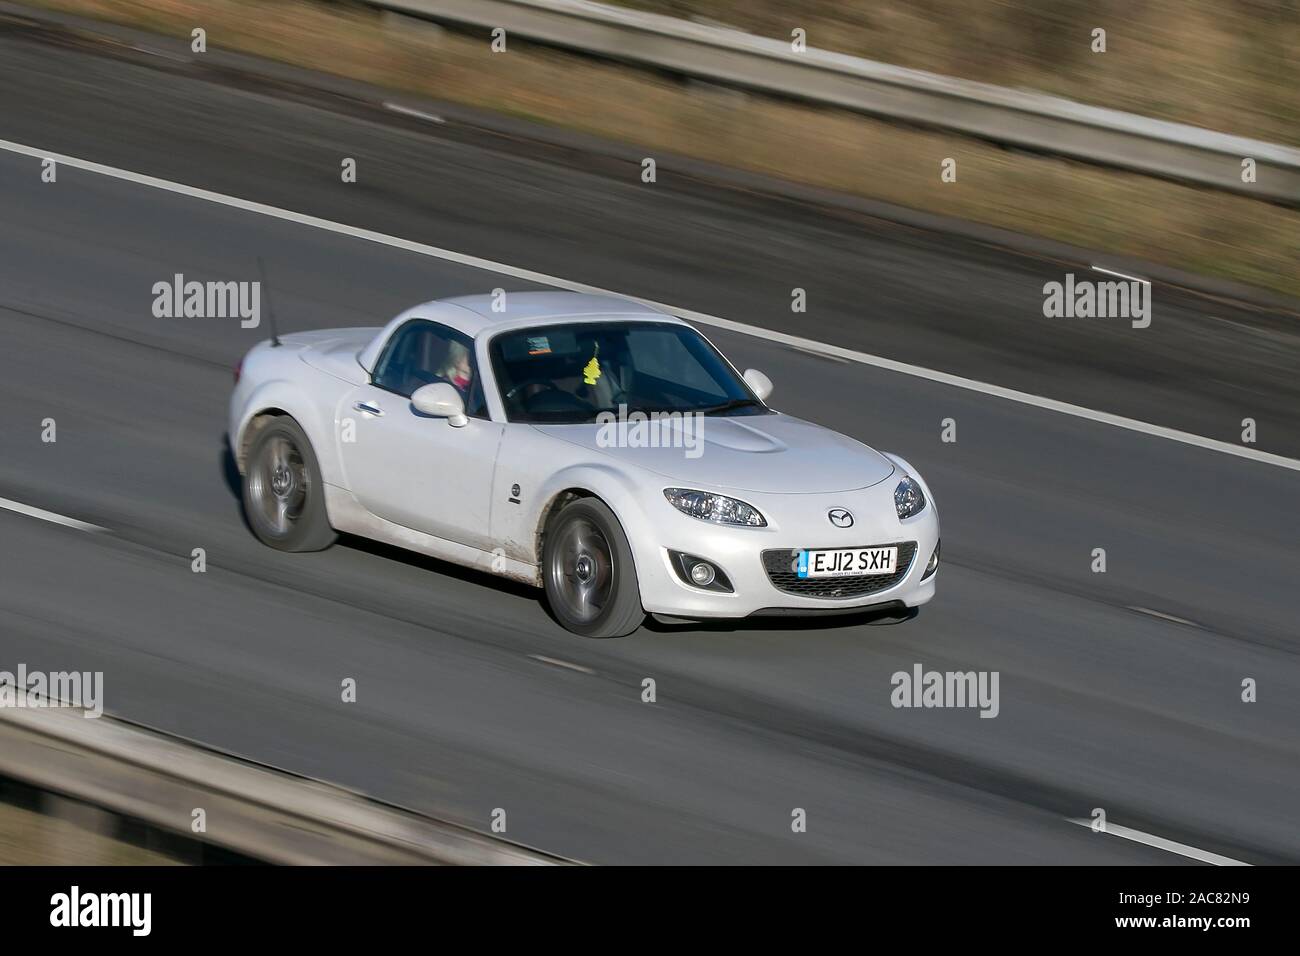 Mazda Mx-5 I Roadster Venture E; Blurred moving car traveling at speed on the M61 motorway; Slow camera shutter speed vehicle movement, Manchester, UK Stock Photo